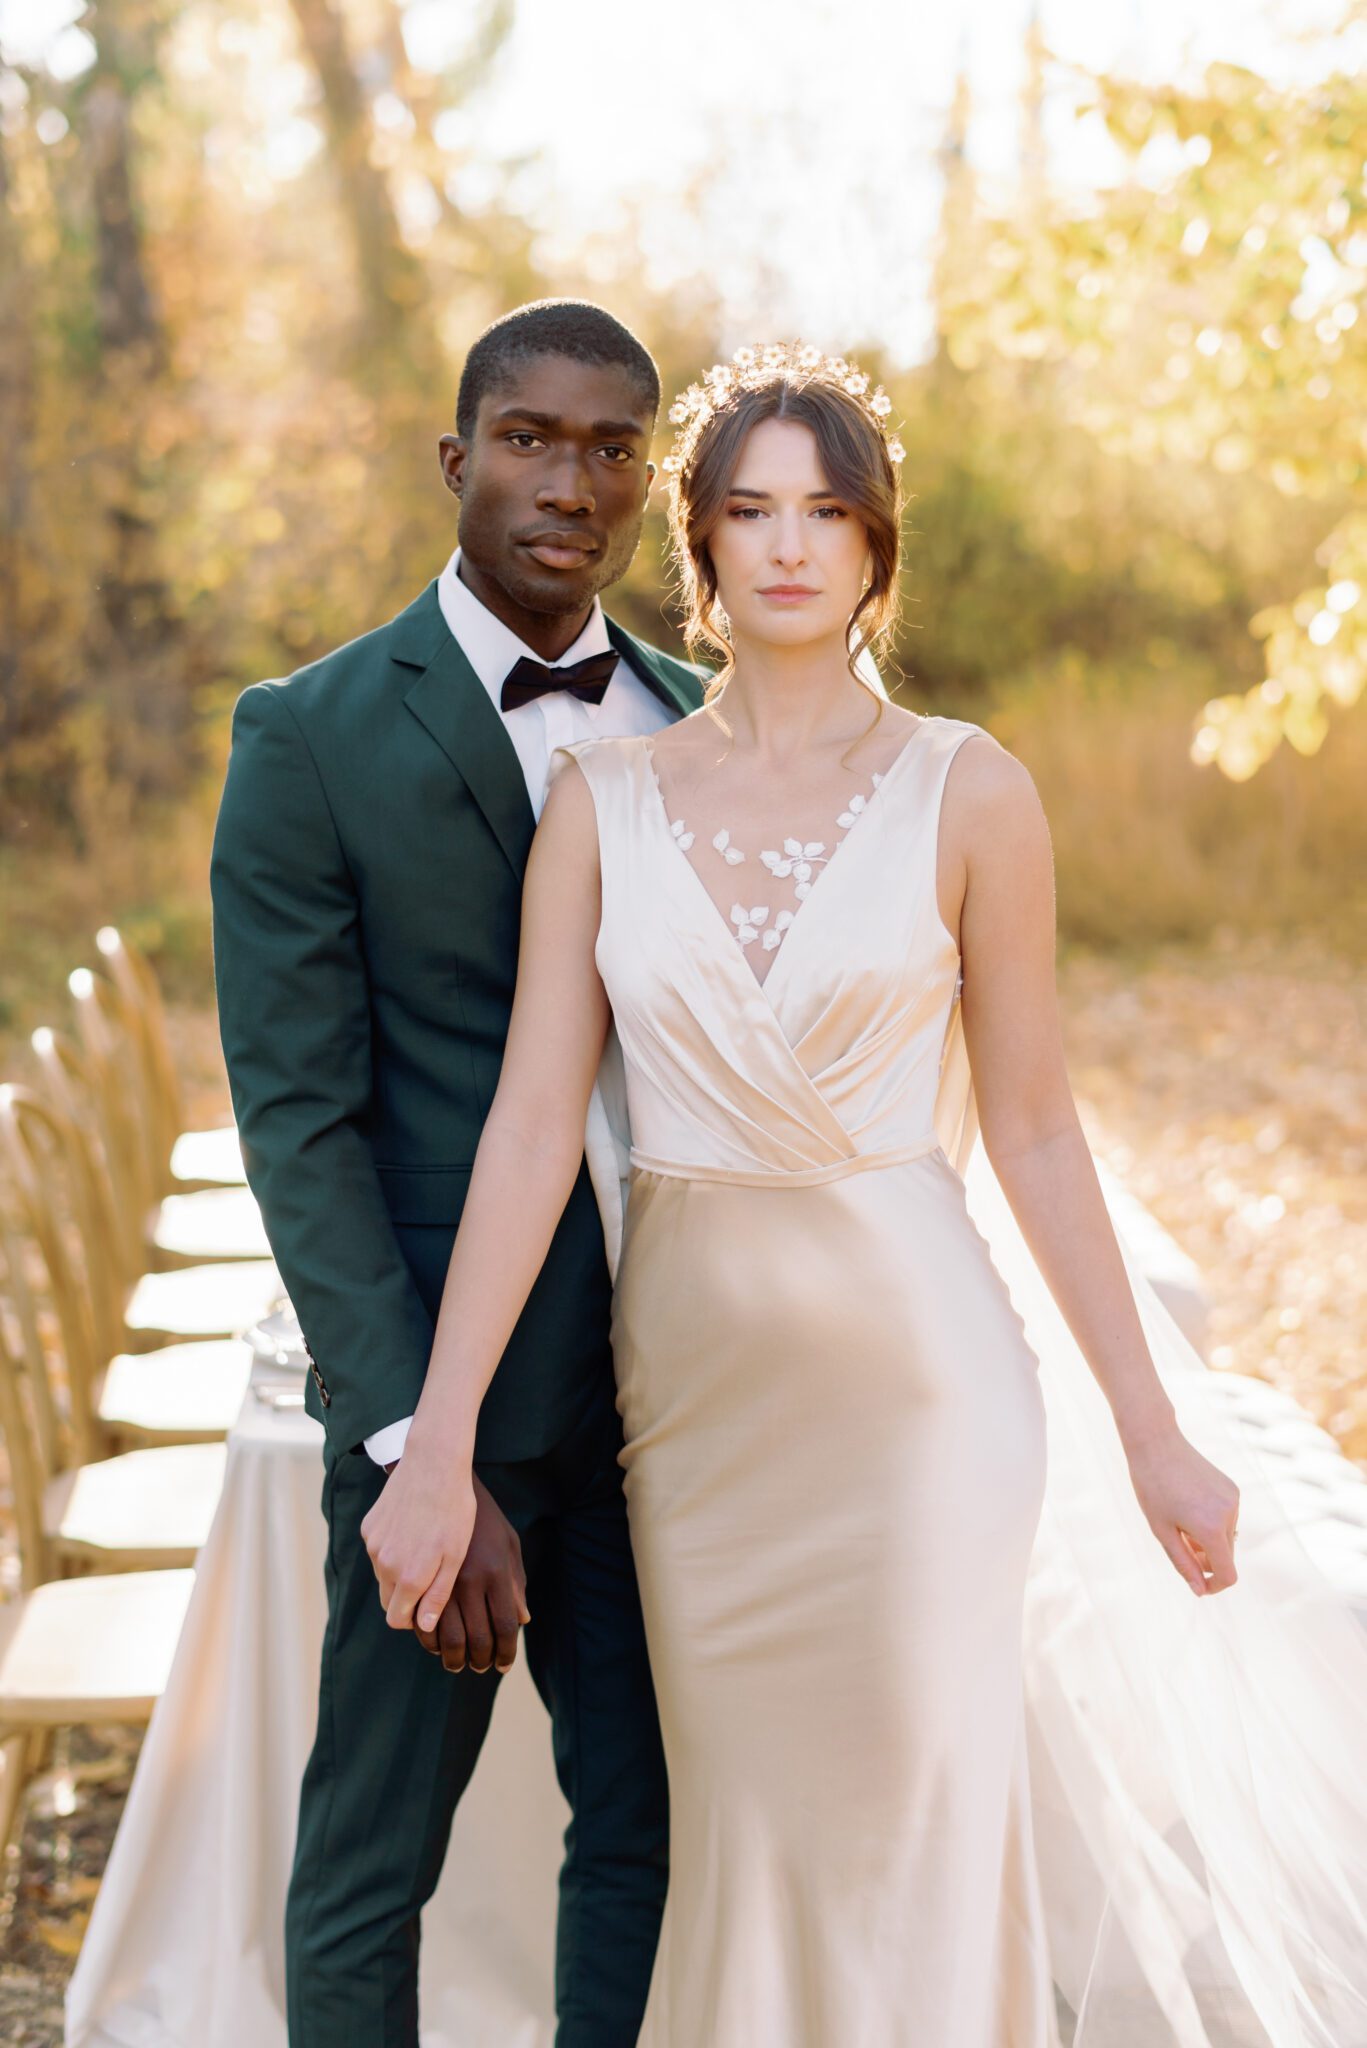 Fine art wedding photography by Kaity Body. Intimate Autumn Wedding featuring emerald green suit and champagne satin bridal gown with lace detail. 